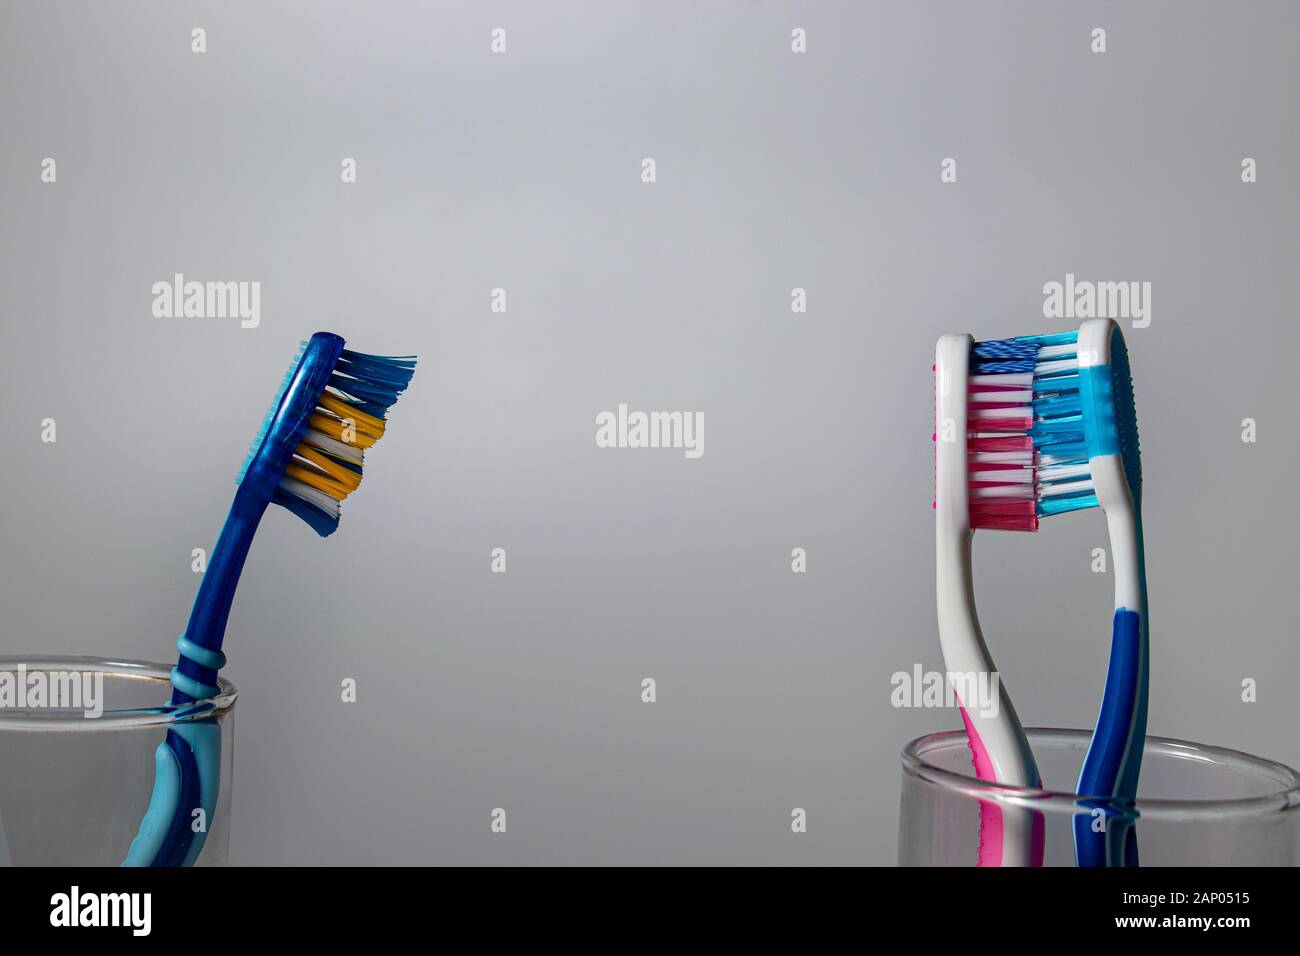 A jealous toothbrush watching at other two toothbrushes as they are kissing Stock Photo